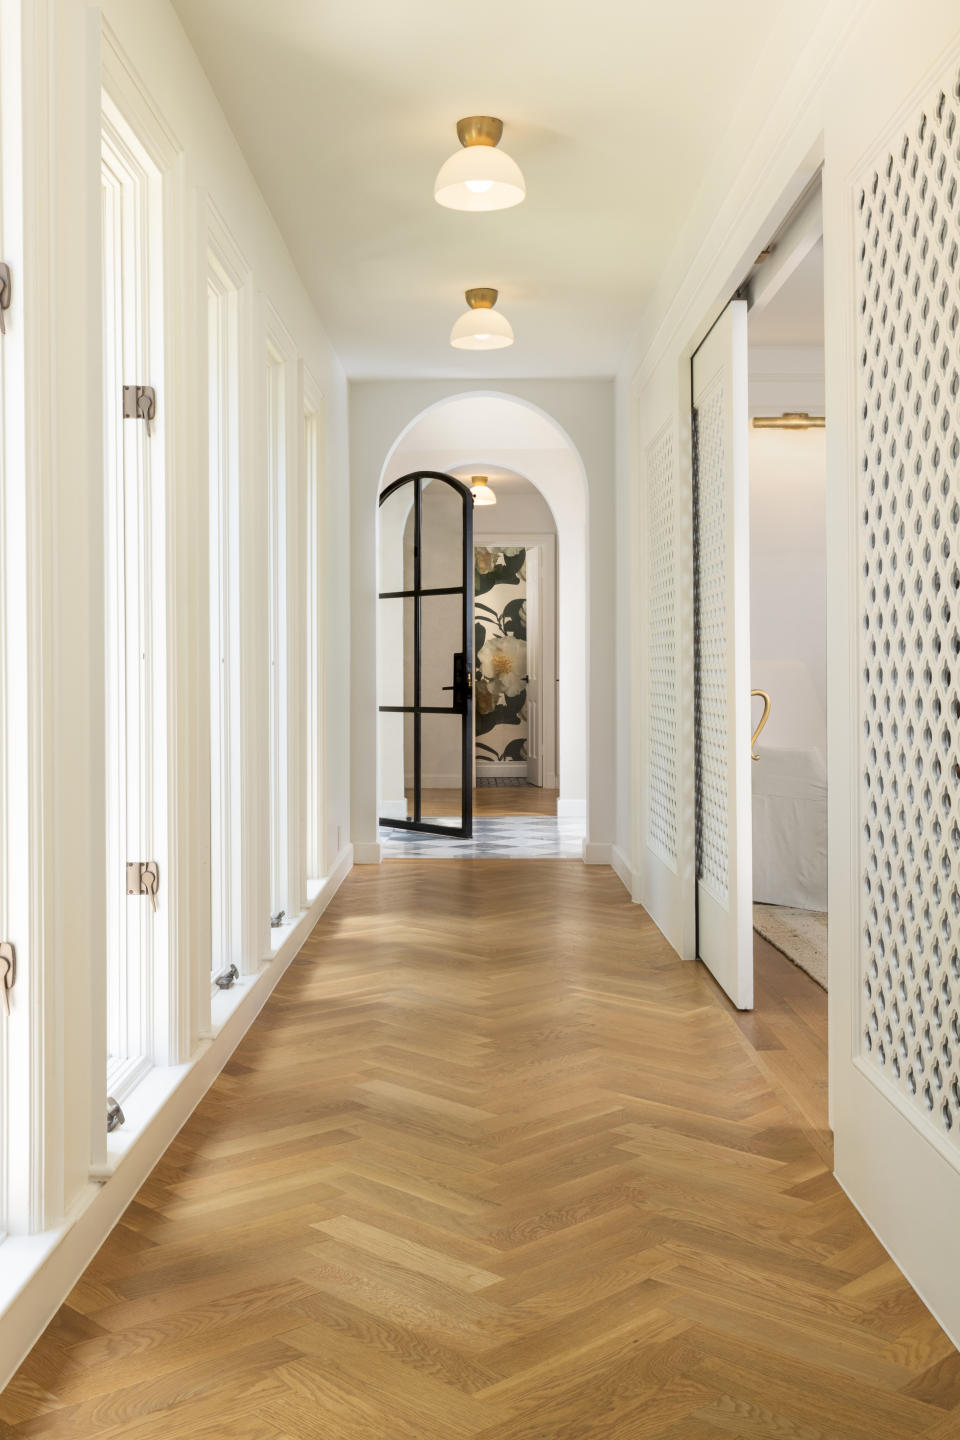 hallway with persian inspired doors and white walls